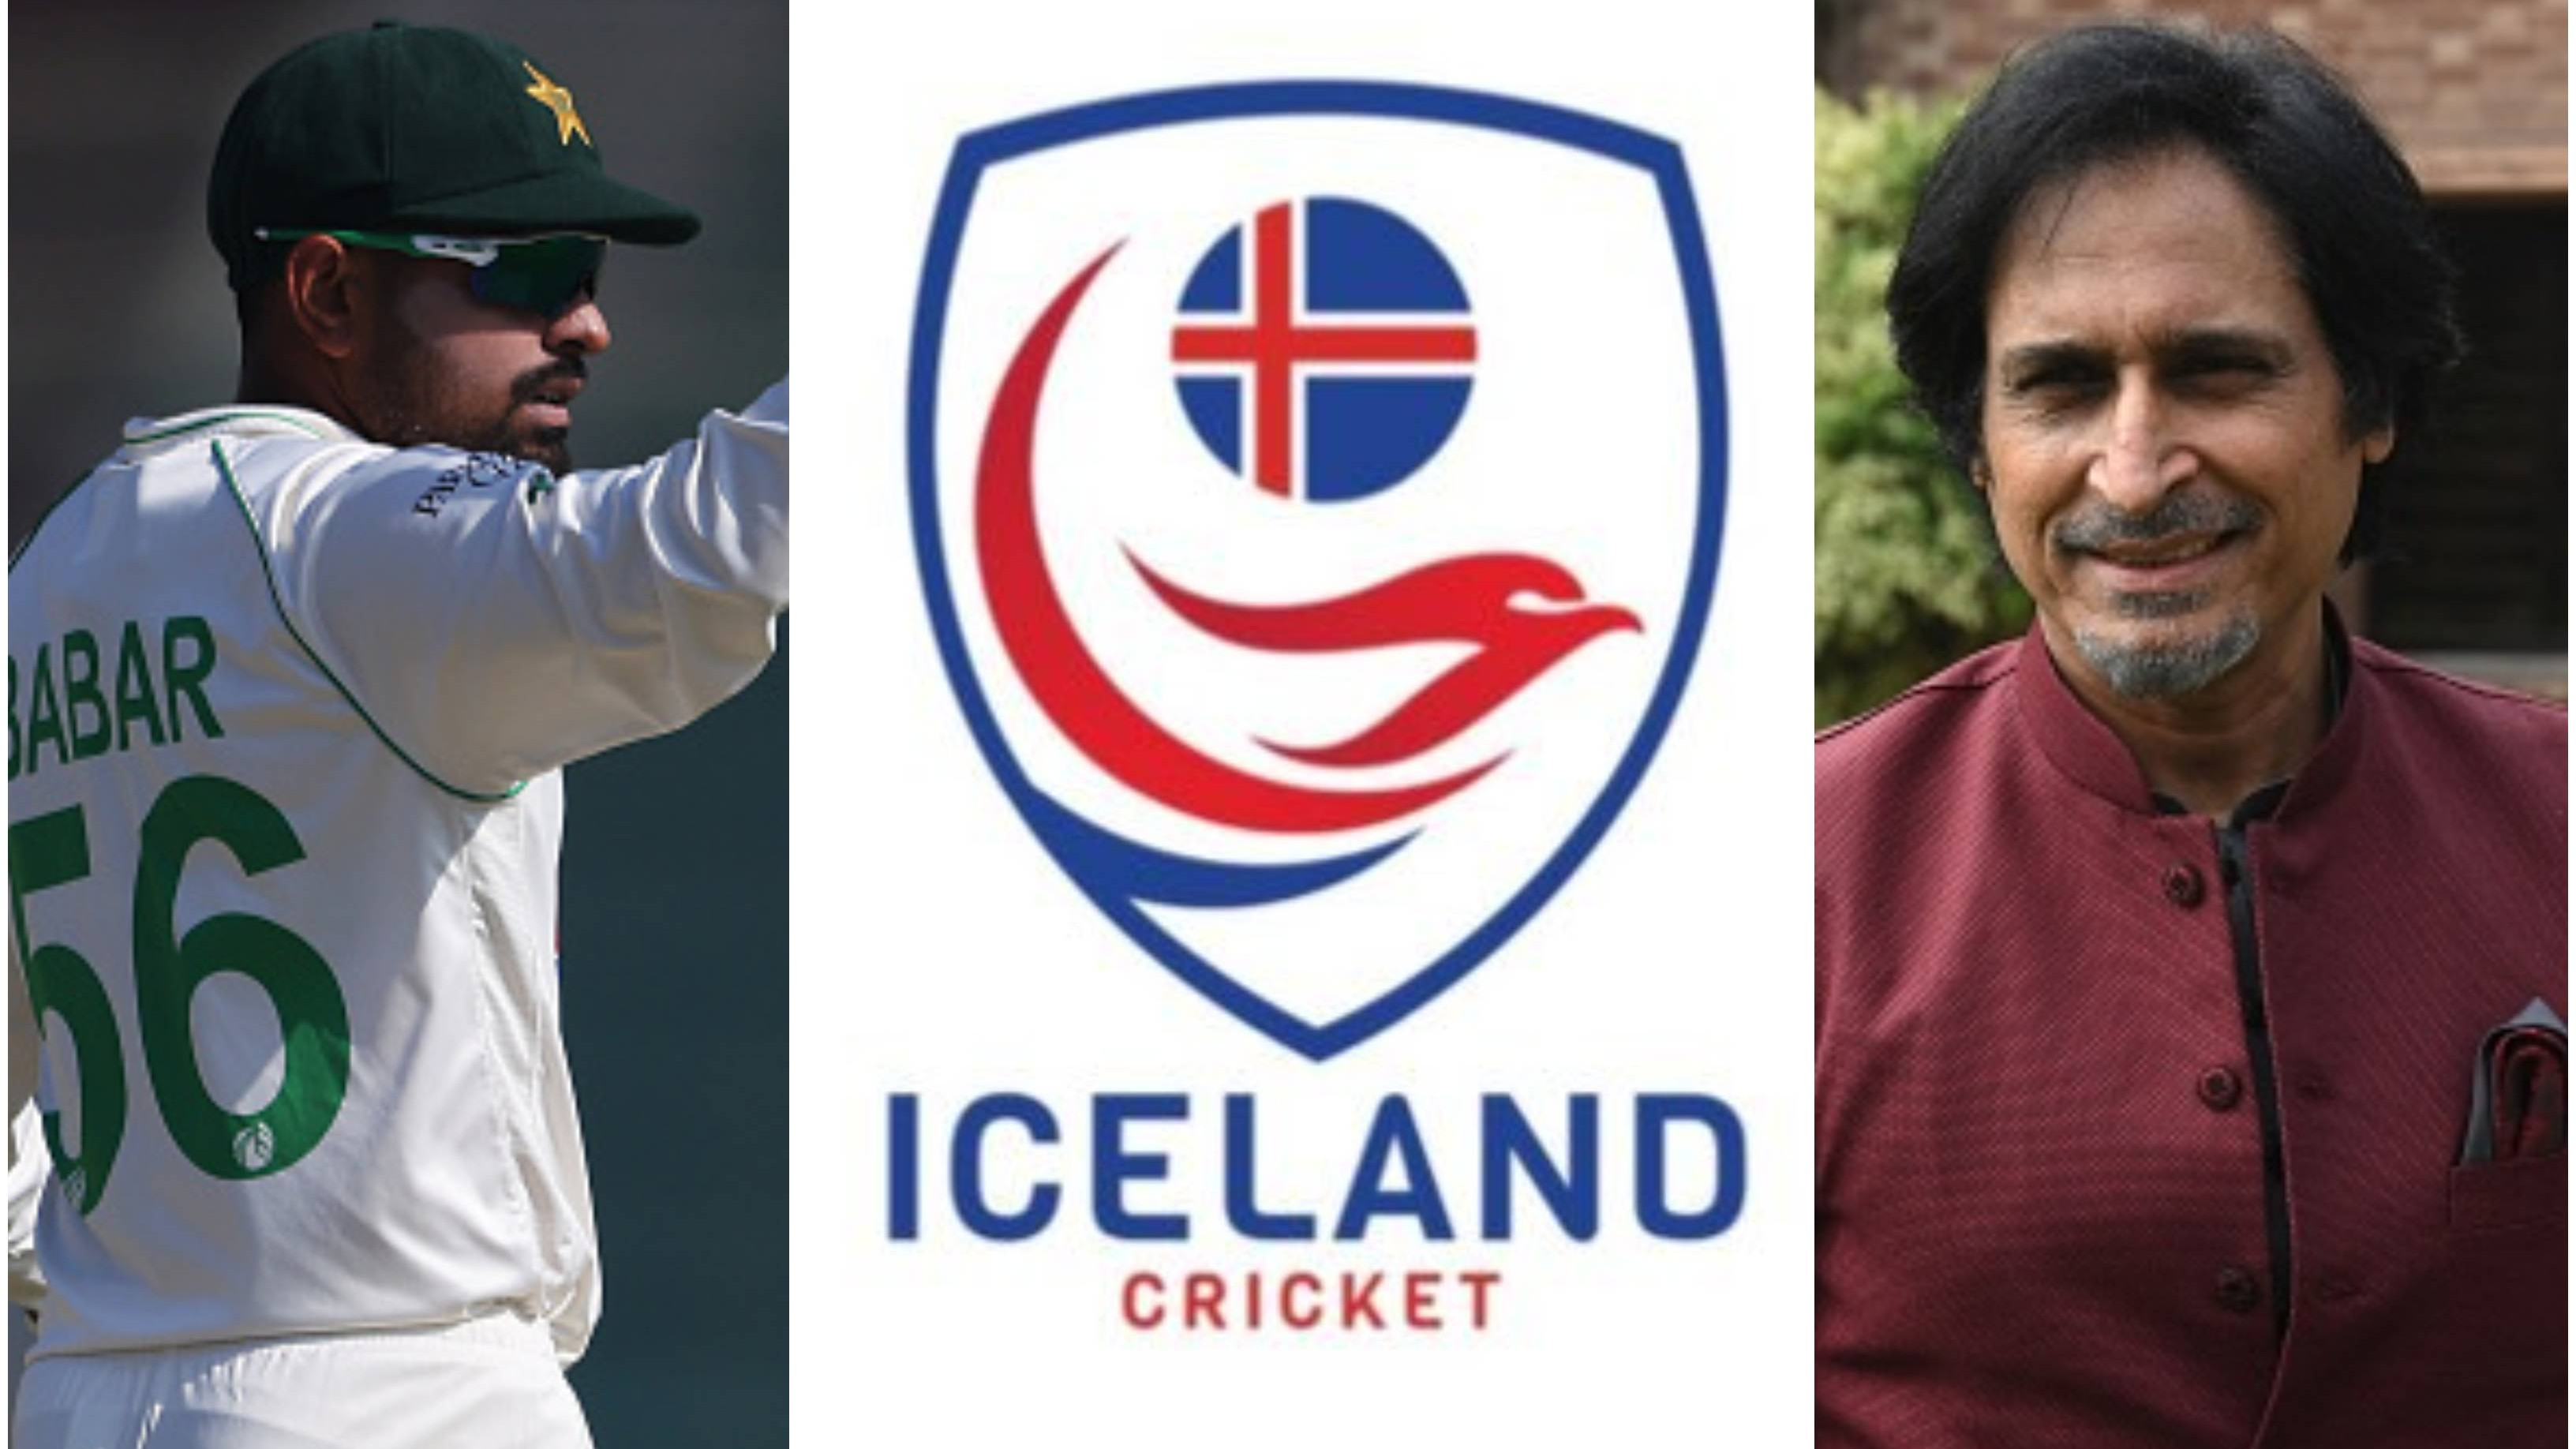 PAK v ENG 2022: “We are happy to come and tour Pakistan and lose 3-0,” Iceland Cricket roasts Pakistan on Twitter